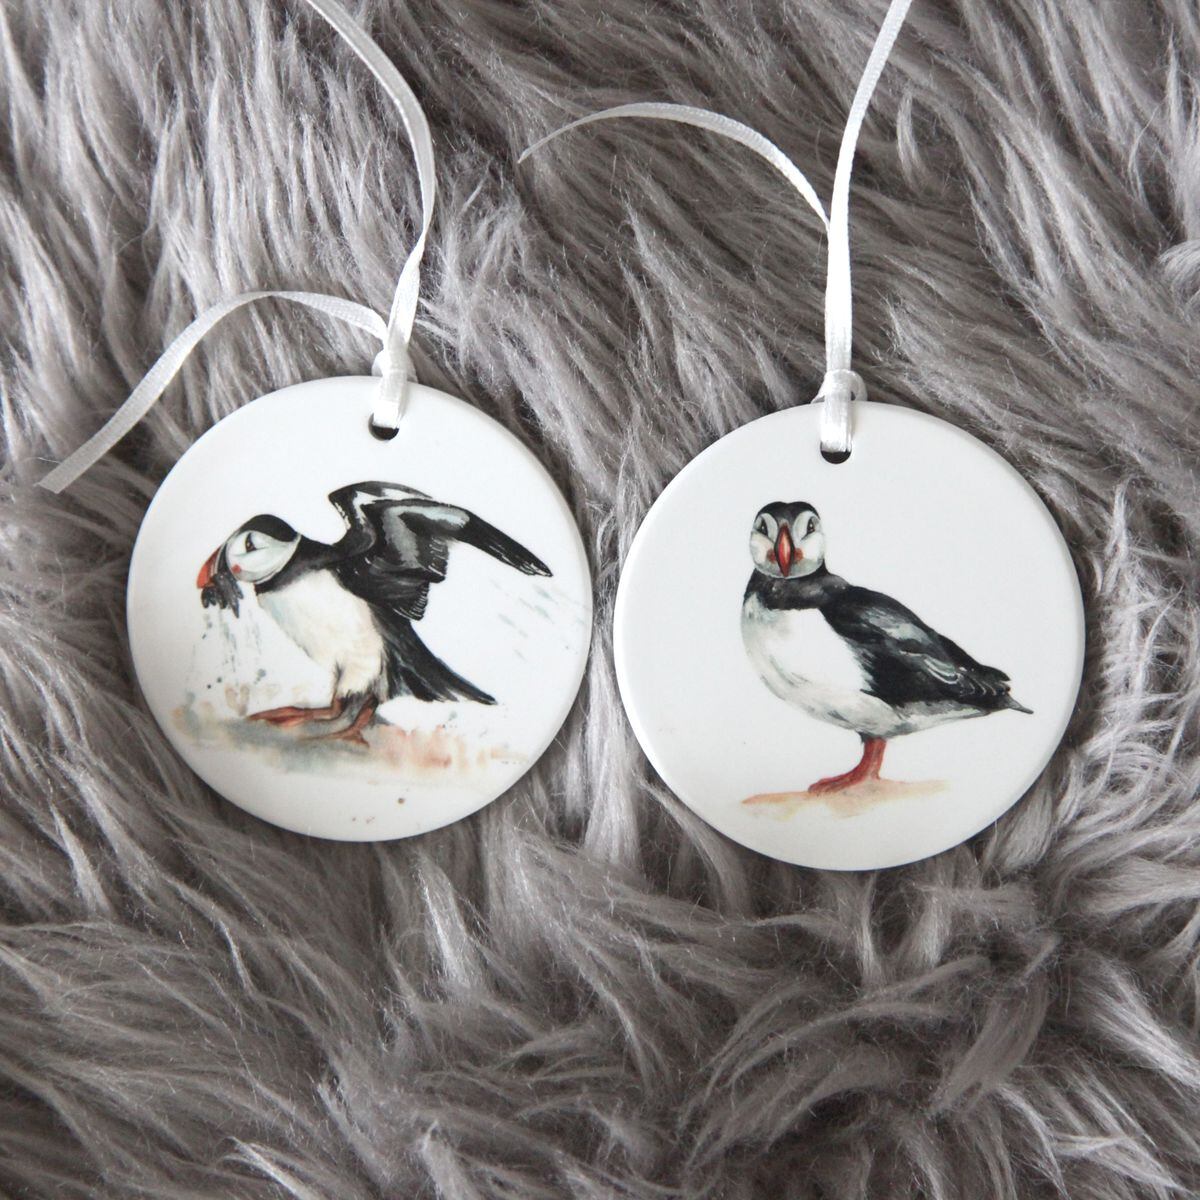 Puffin medallions